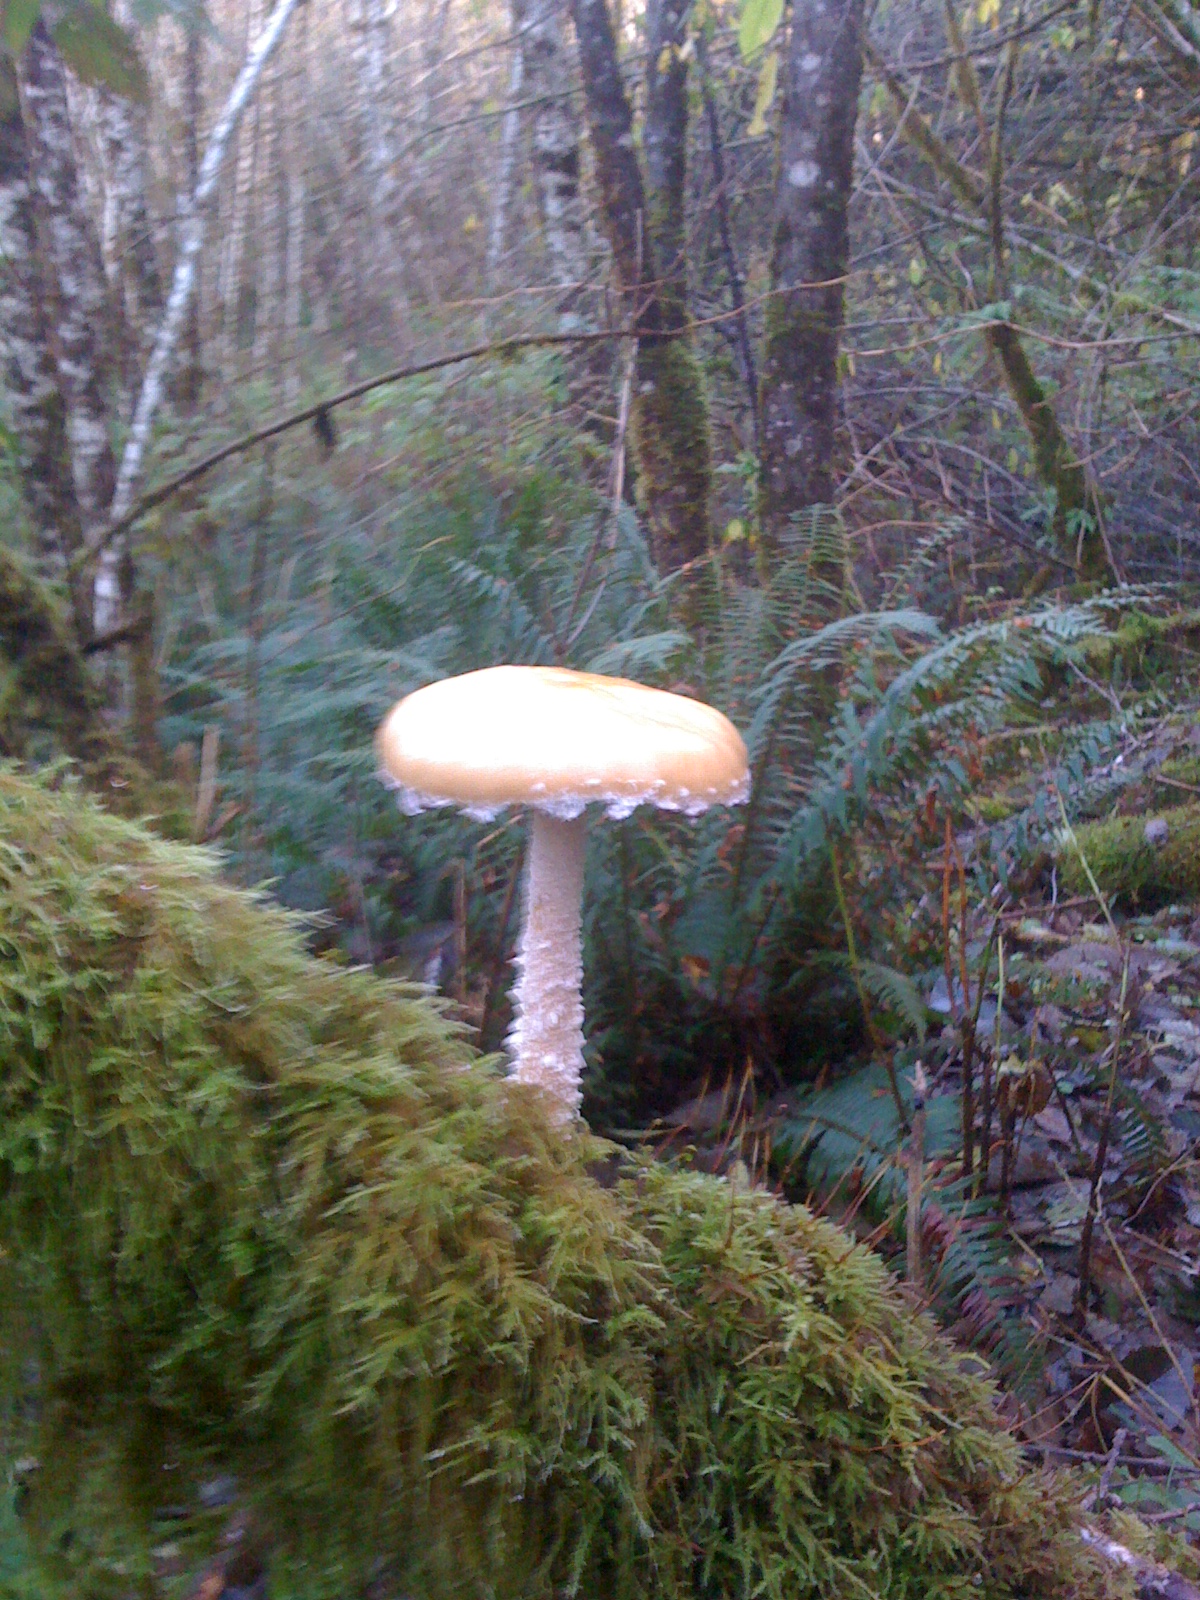 This is another awesome mushroom I found while mushroom hunting,